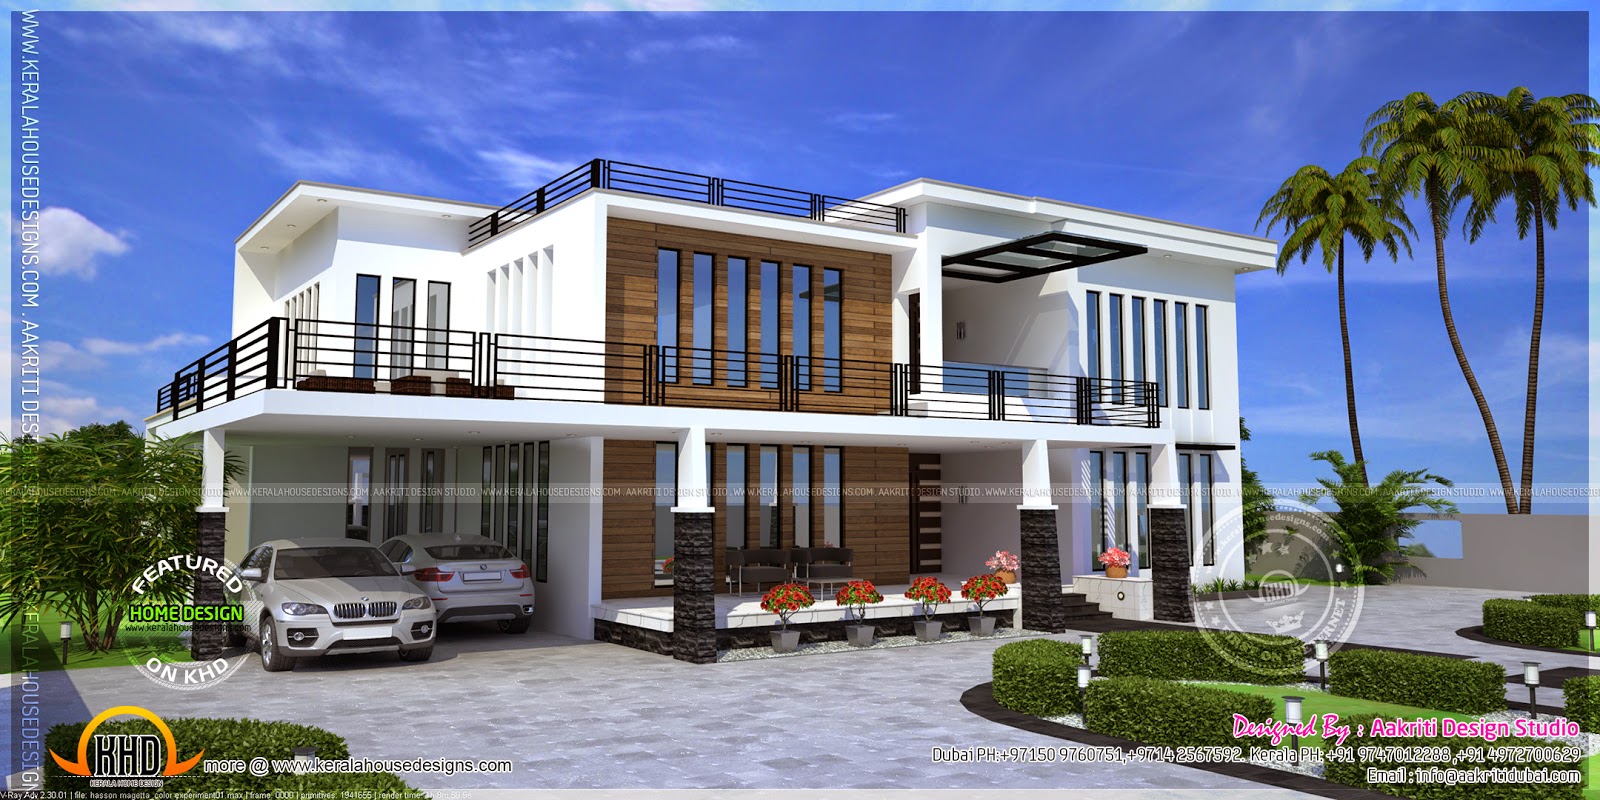  Contemporary  house  view  Kerala home  design and floor plans 